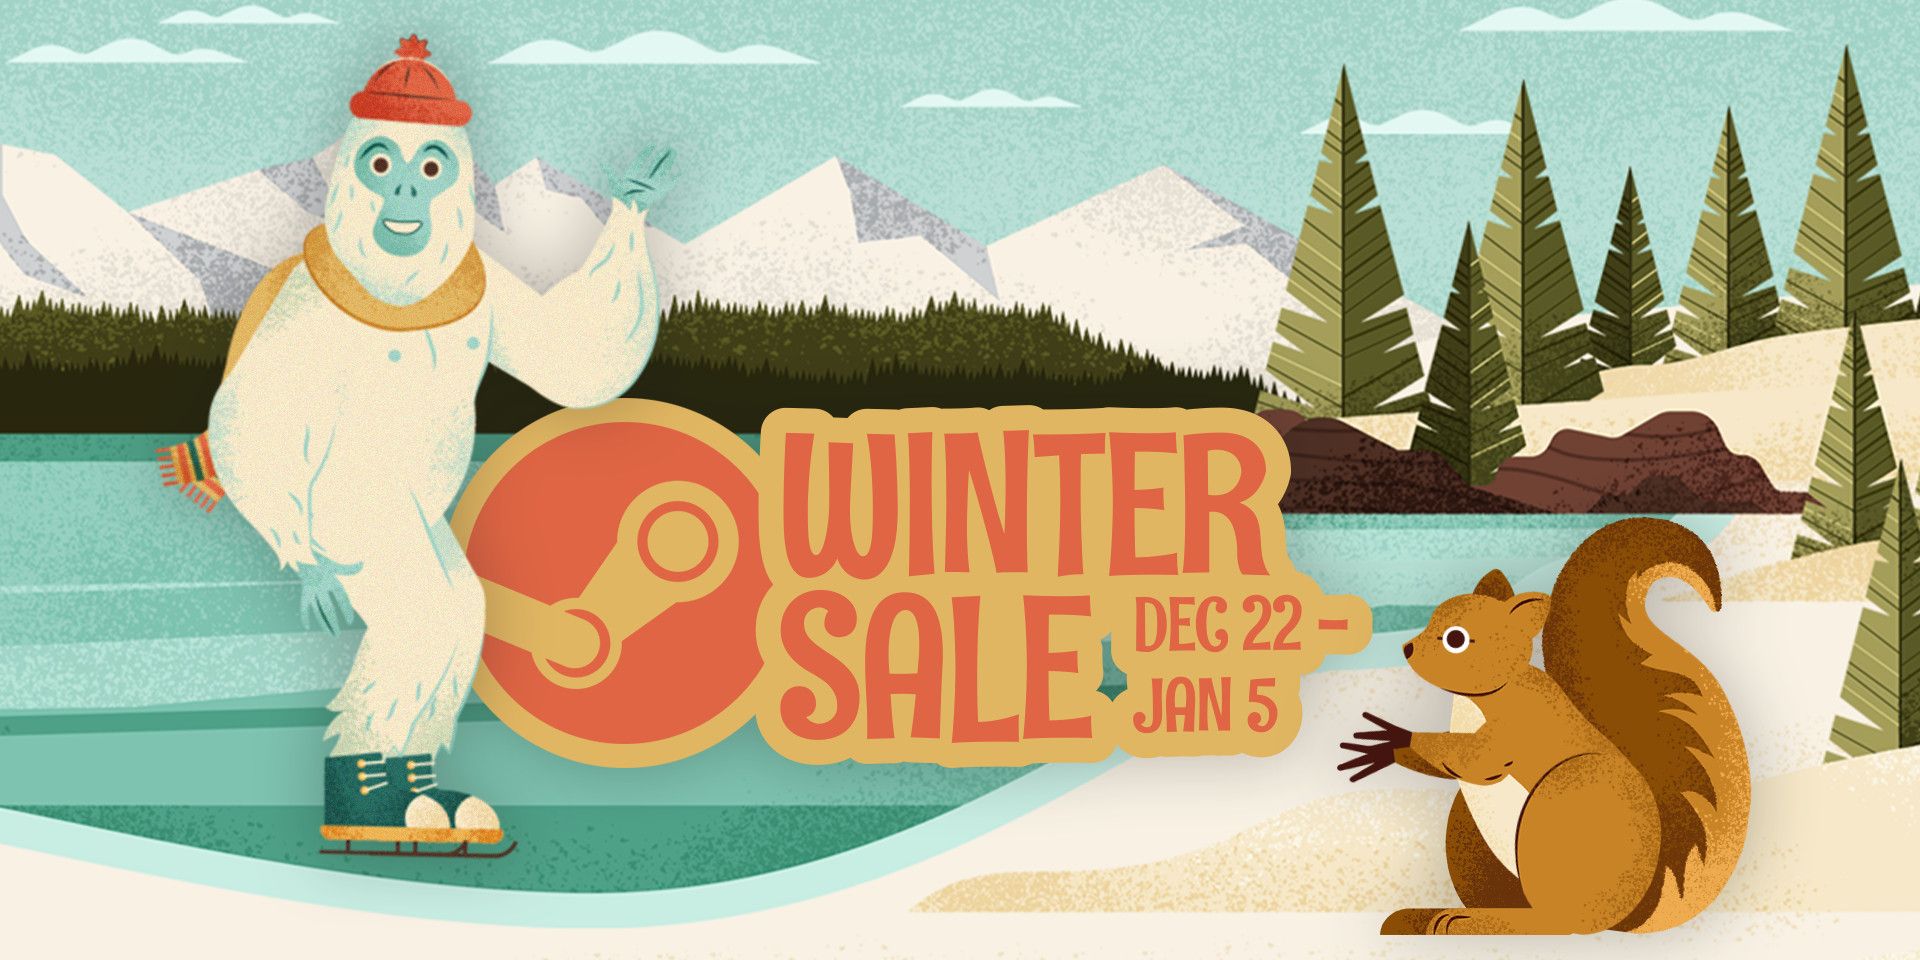 Steam Winter Sale 2021 Discounts Thousands Of Games